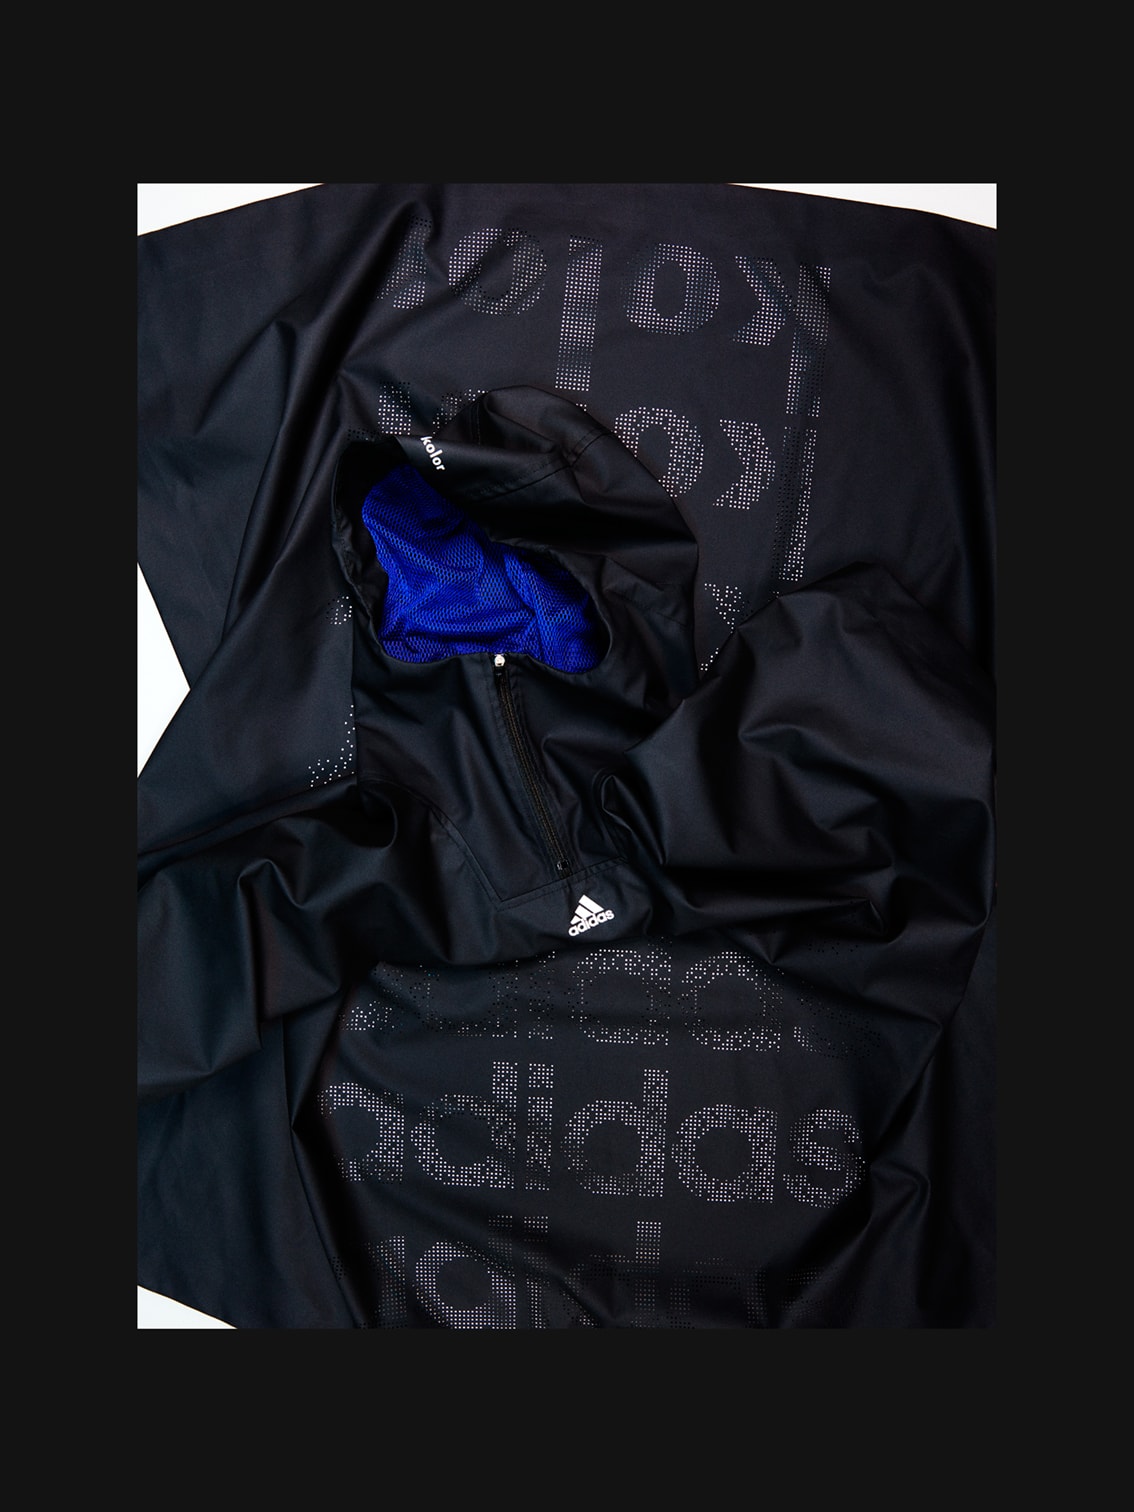 adidas by kolor "Creative Deconstruction" Collection Capsule Junichi Abe